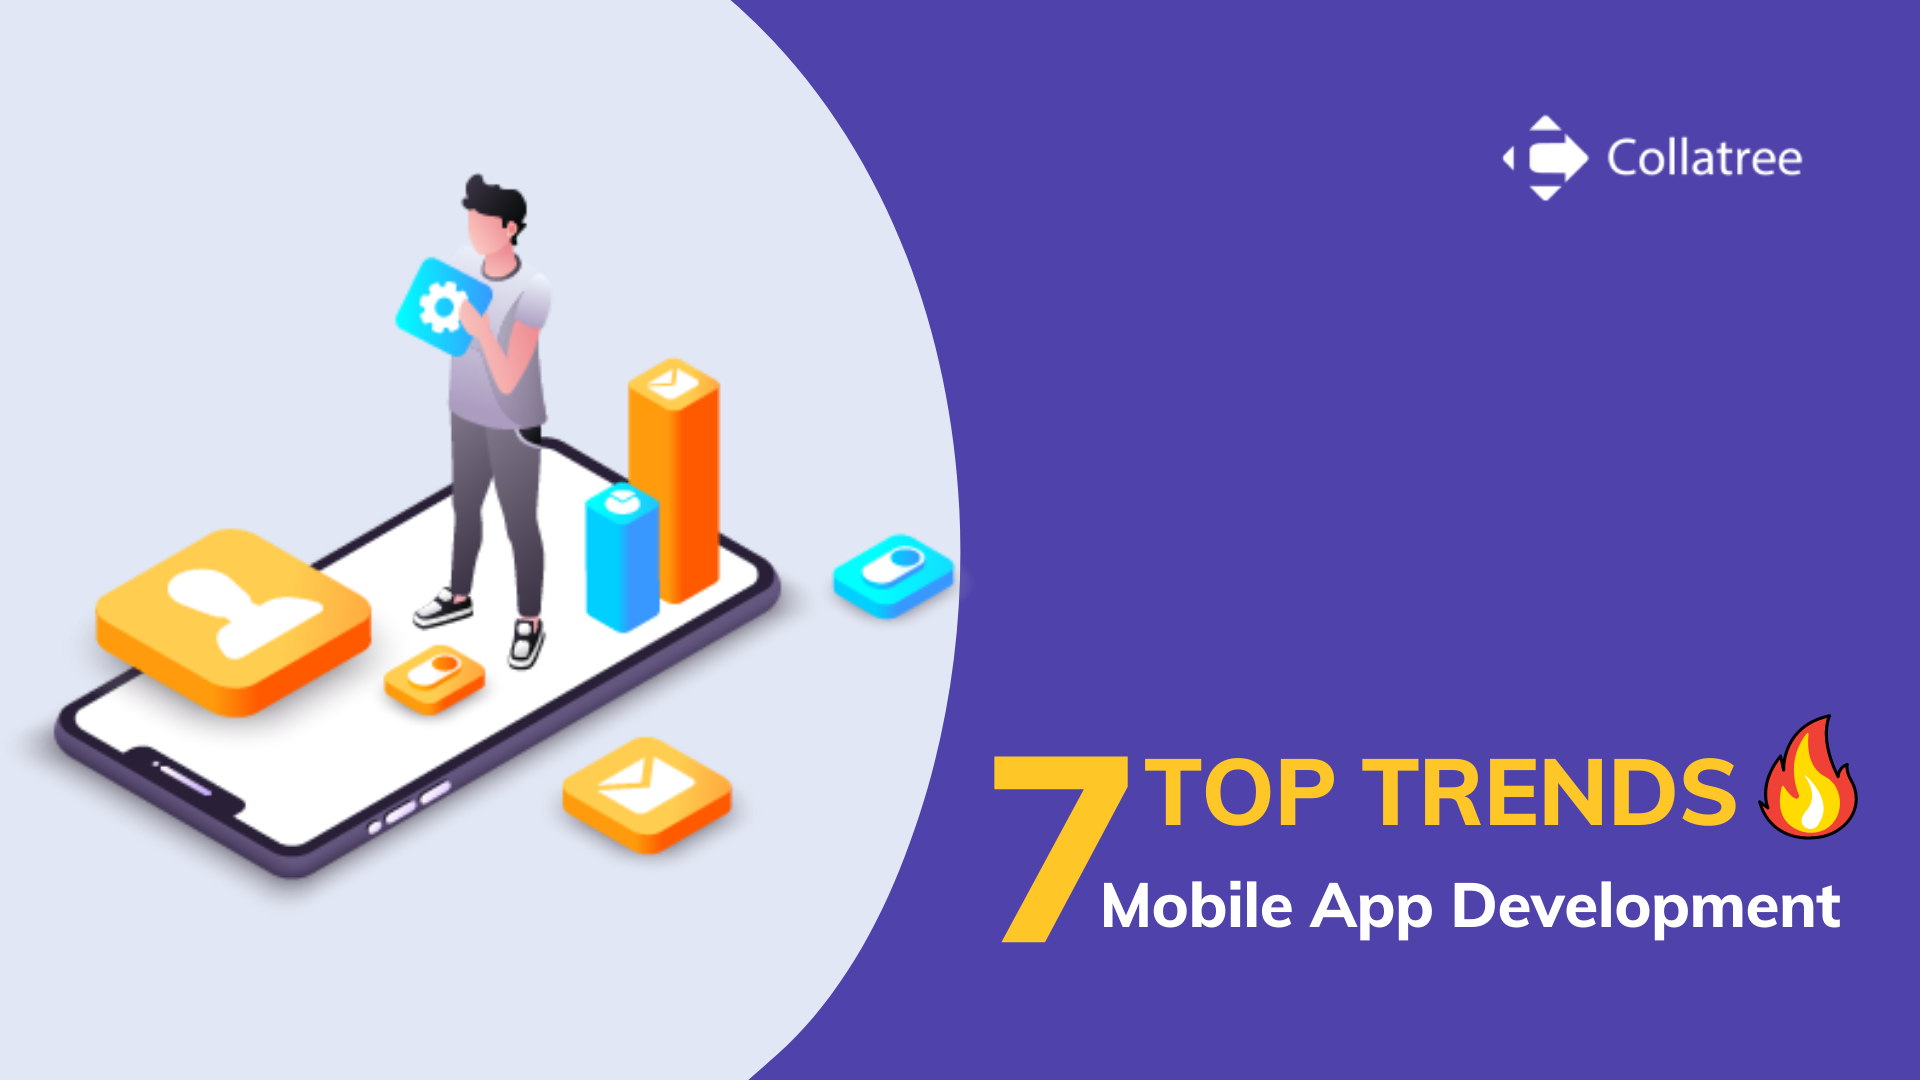 7 Top Mobile App Development Trends to Watch Out in 2021